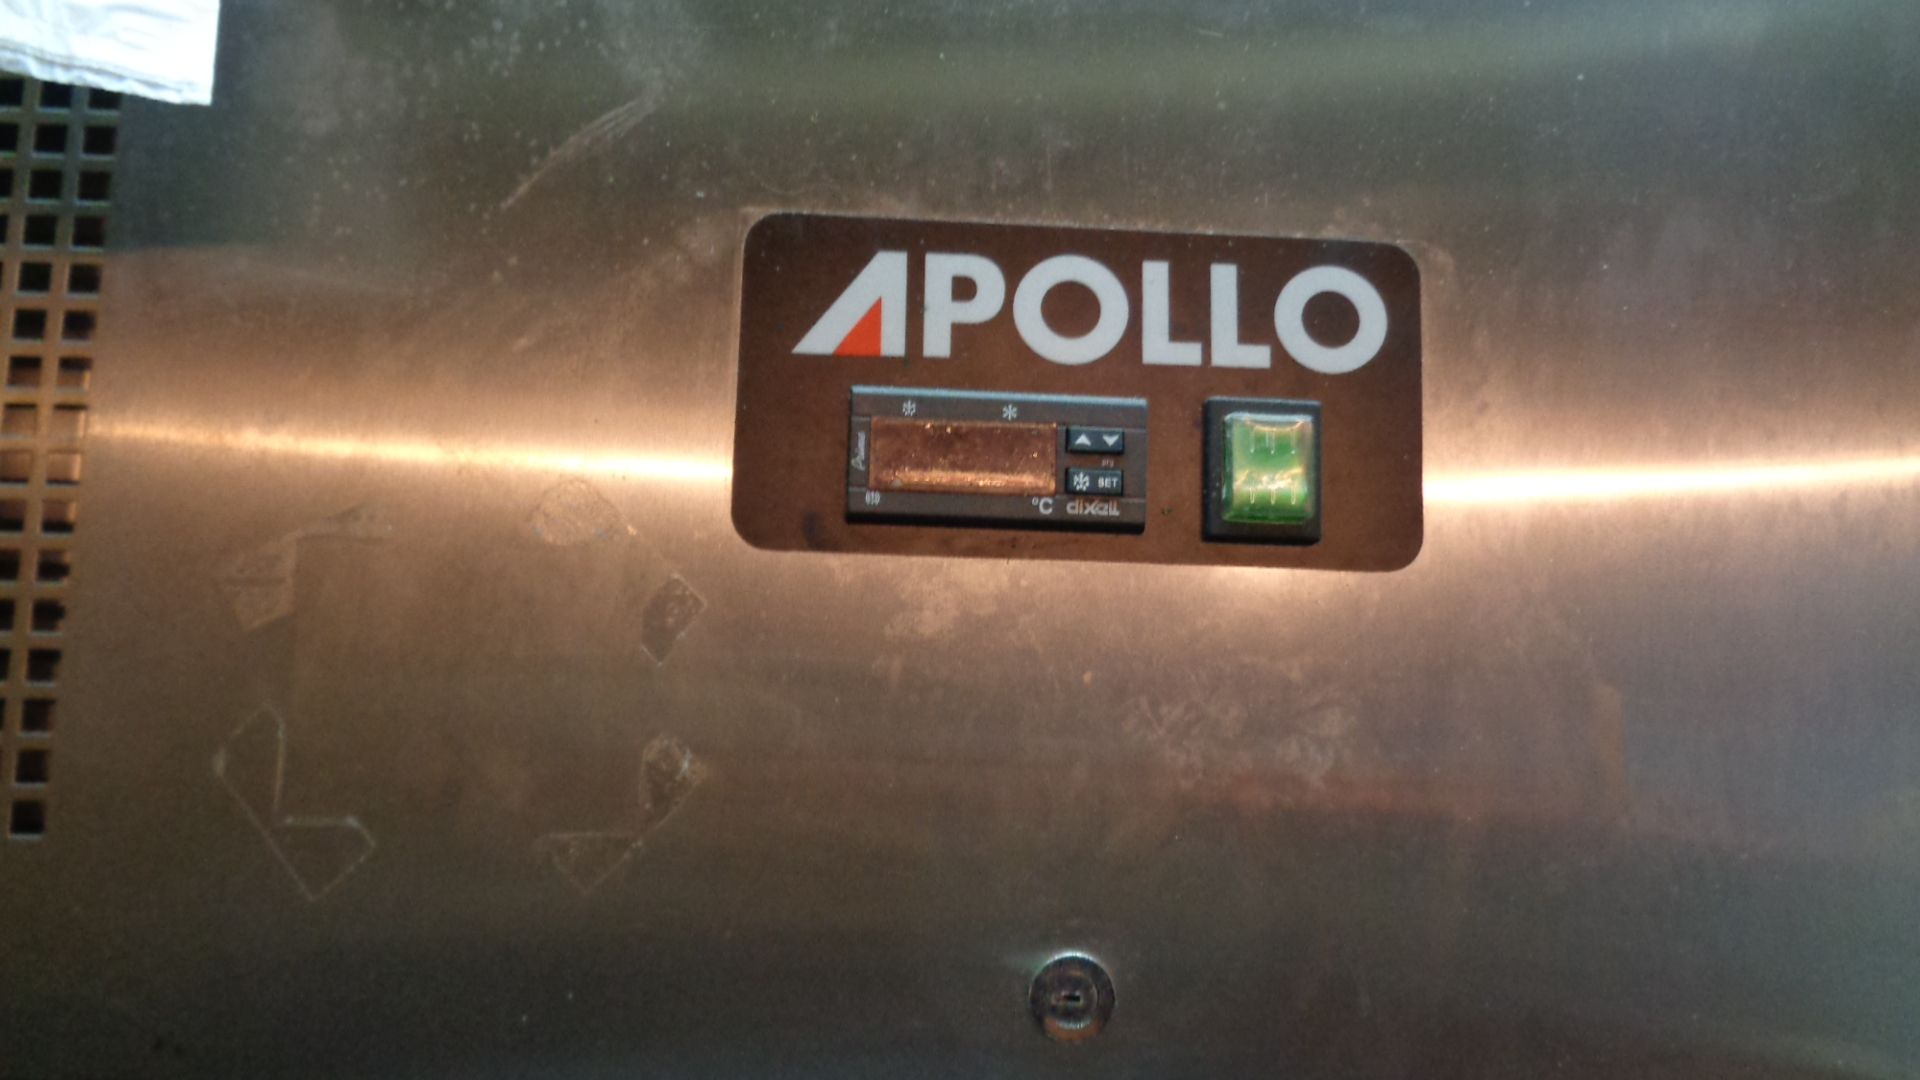 Commercial Free Standing Freezer "Apollo" - Size Height 198Cm Depth 80Cm Width 67Cm - Image 2 of 2